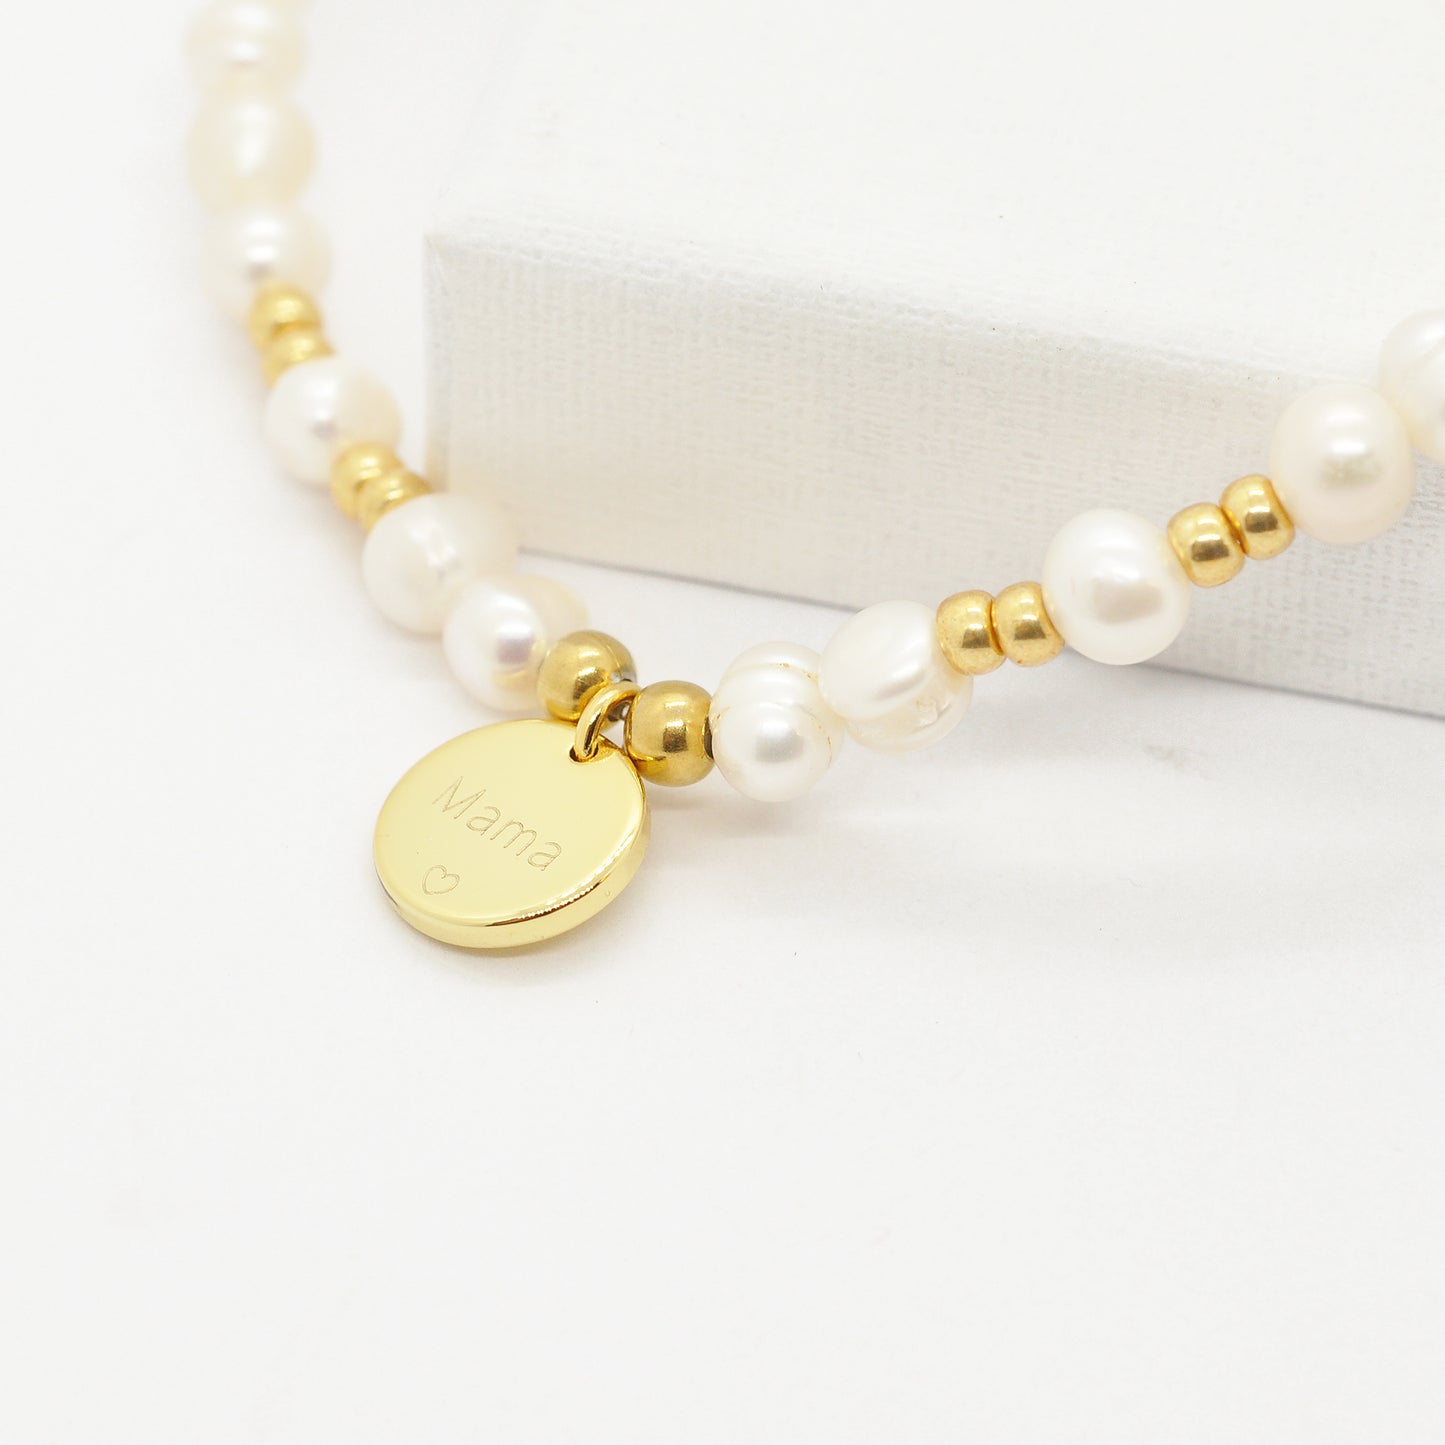 Mama bracelet made of freshwater pearls / gold plated